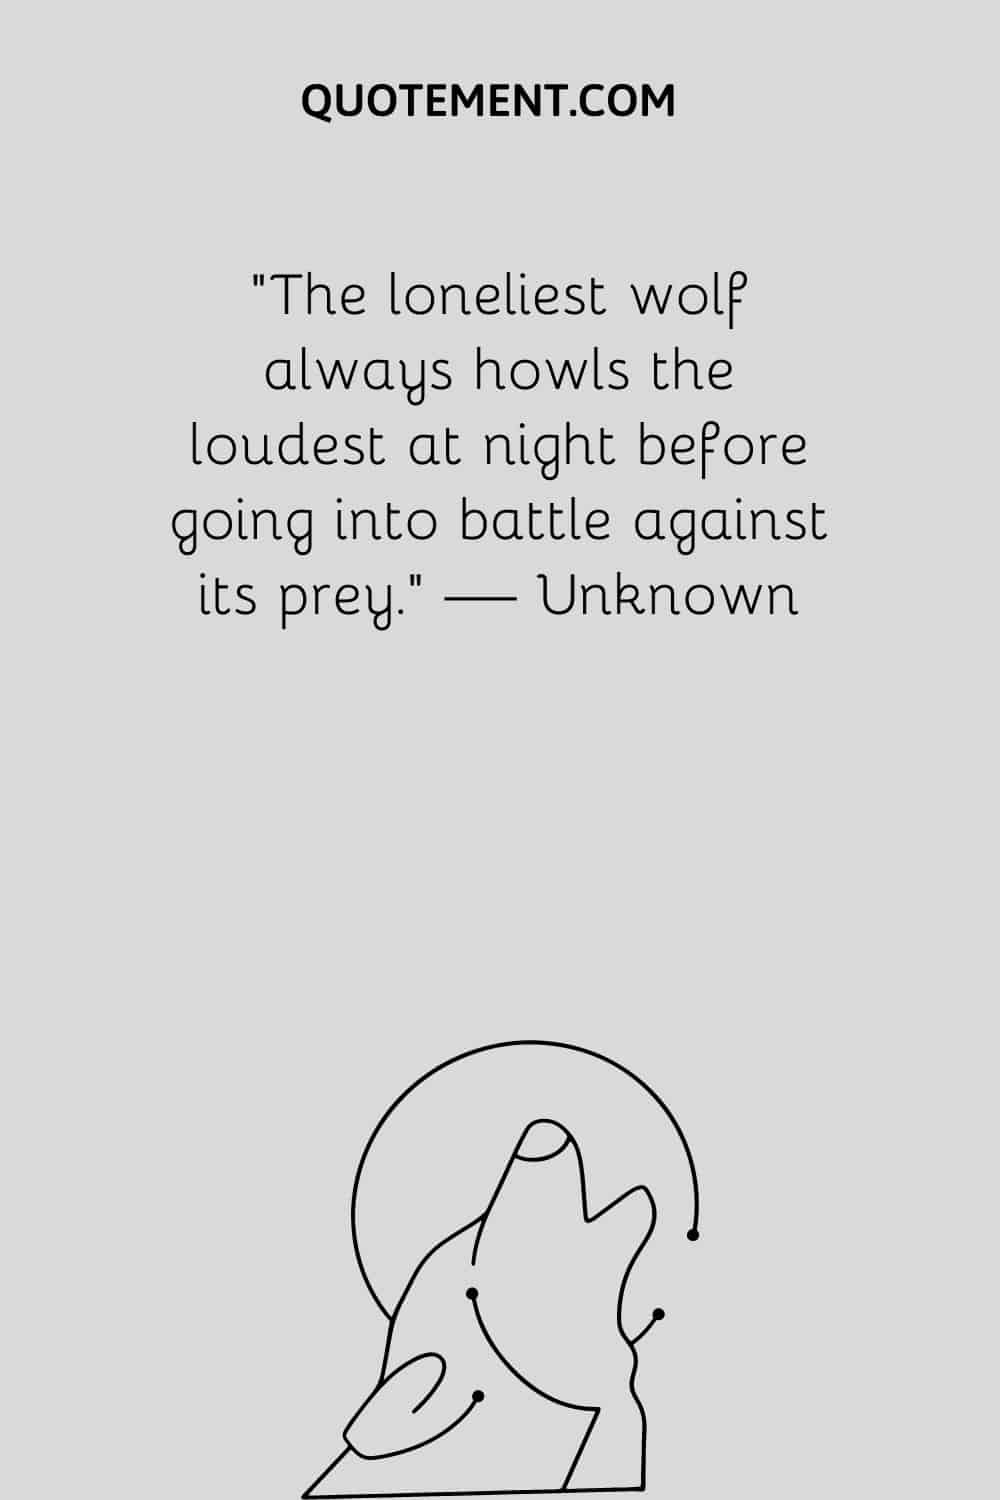 a howling wolf and moon illustration representing lonely wolf quote